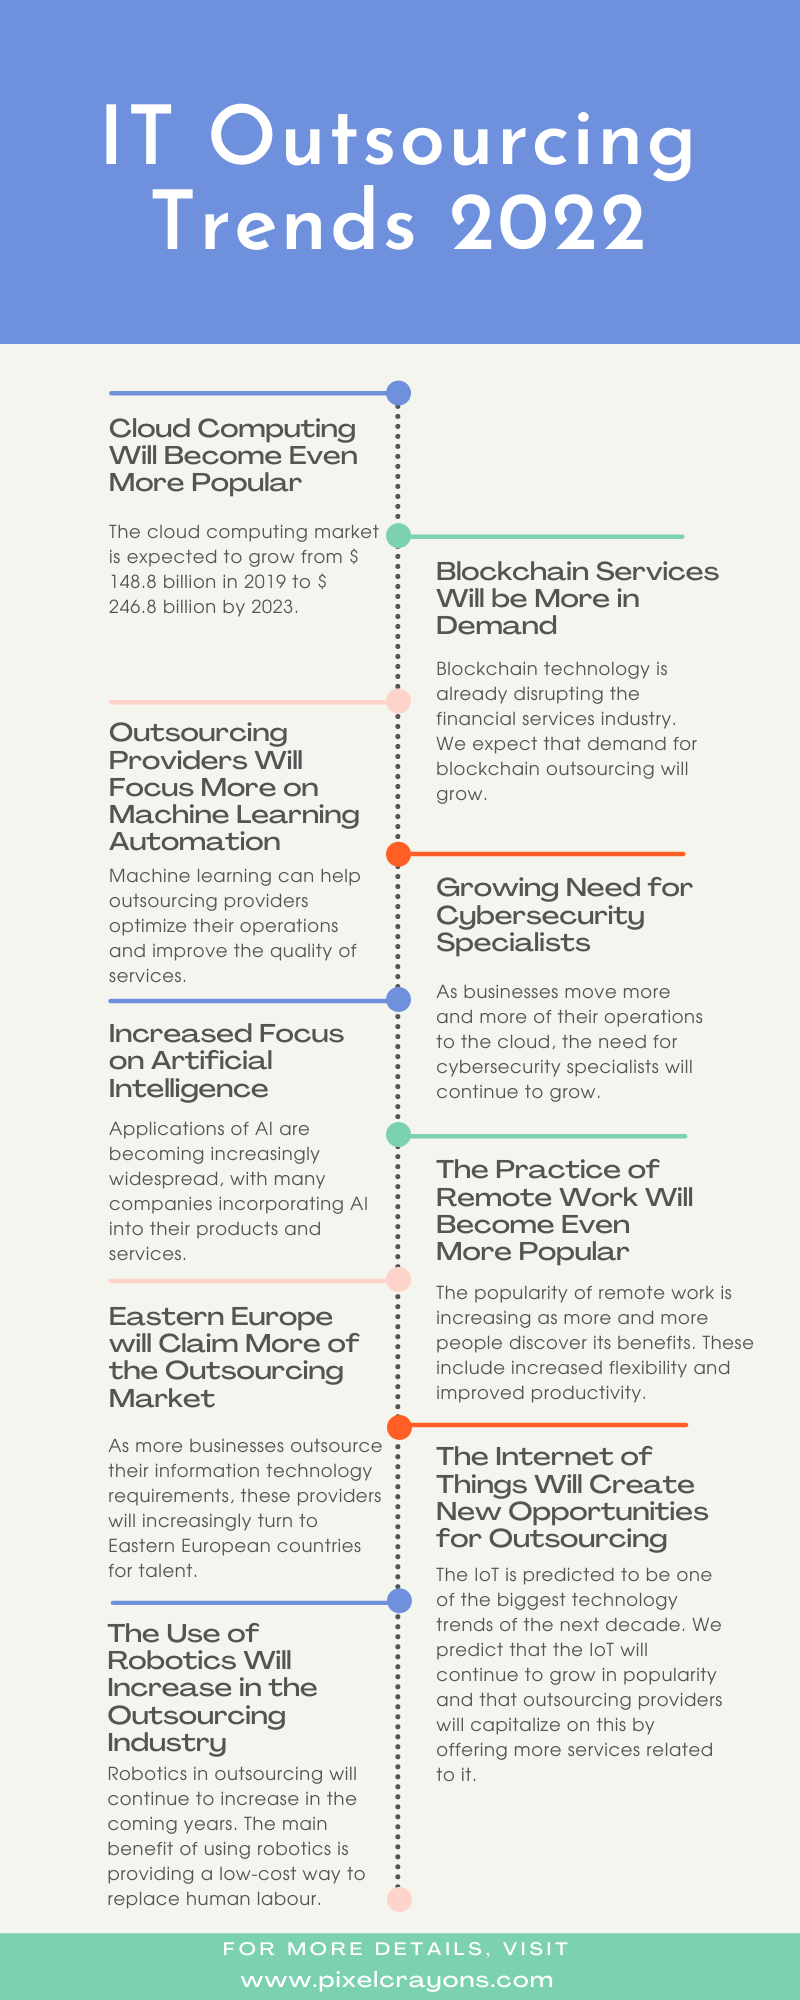 IT Outsourcing Trends 2022 Infographic